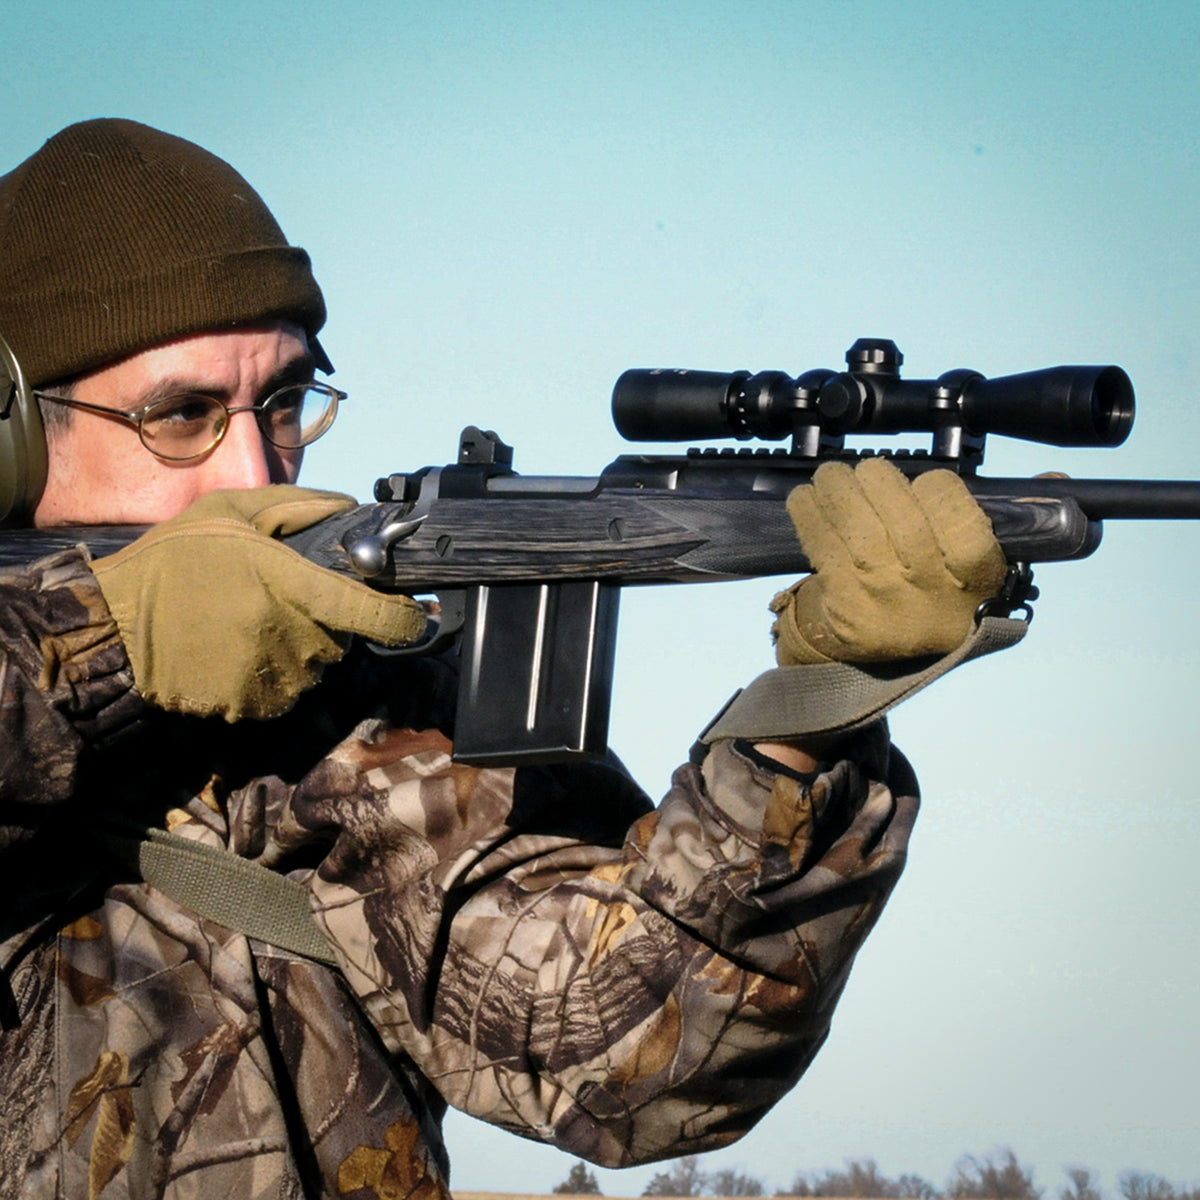 The Long Eye Relief Scope mounted on a Ruger Scout